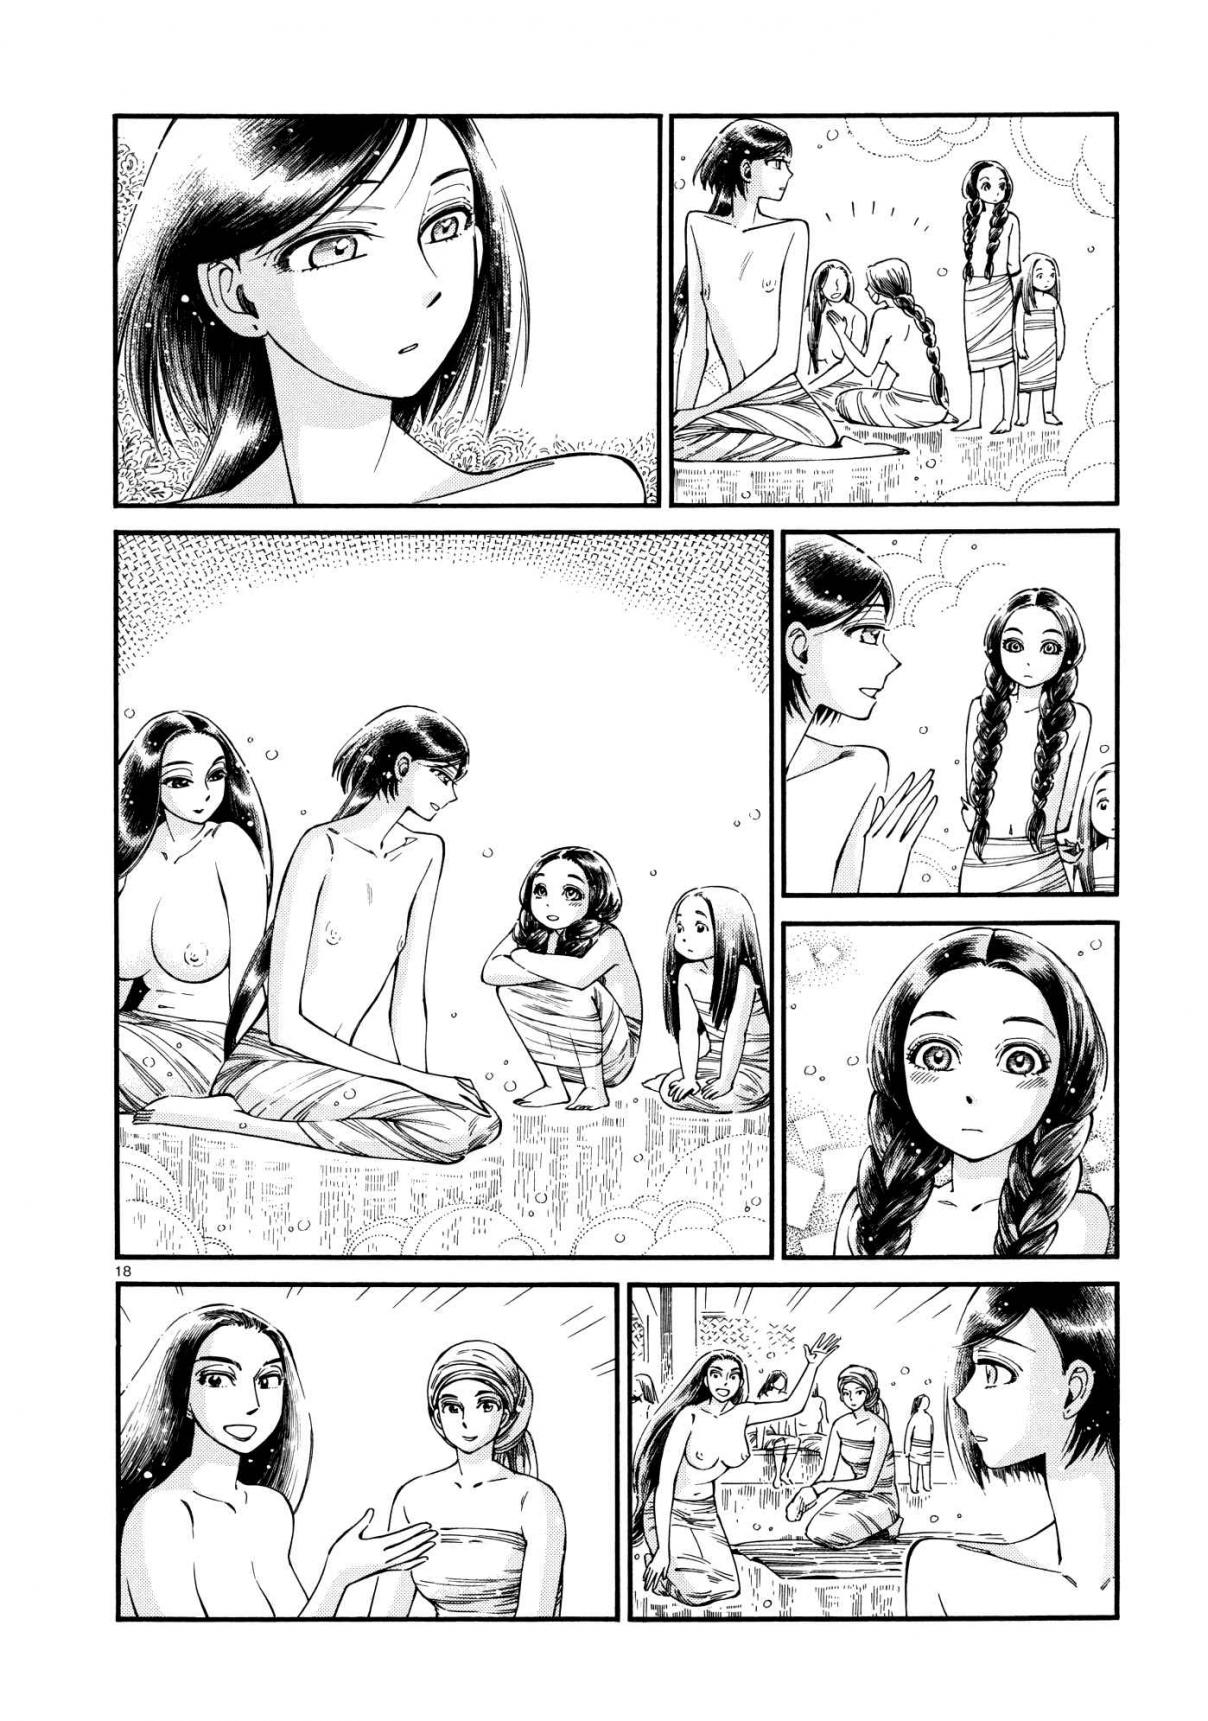 Otoyomegatari Vol. 12 Ch. 86 Knowing Someone for a Long Time